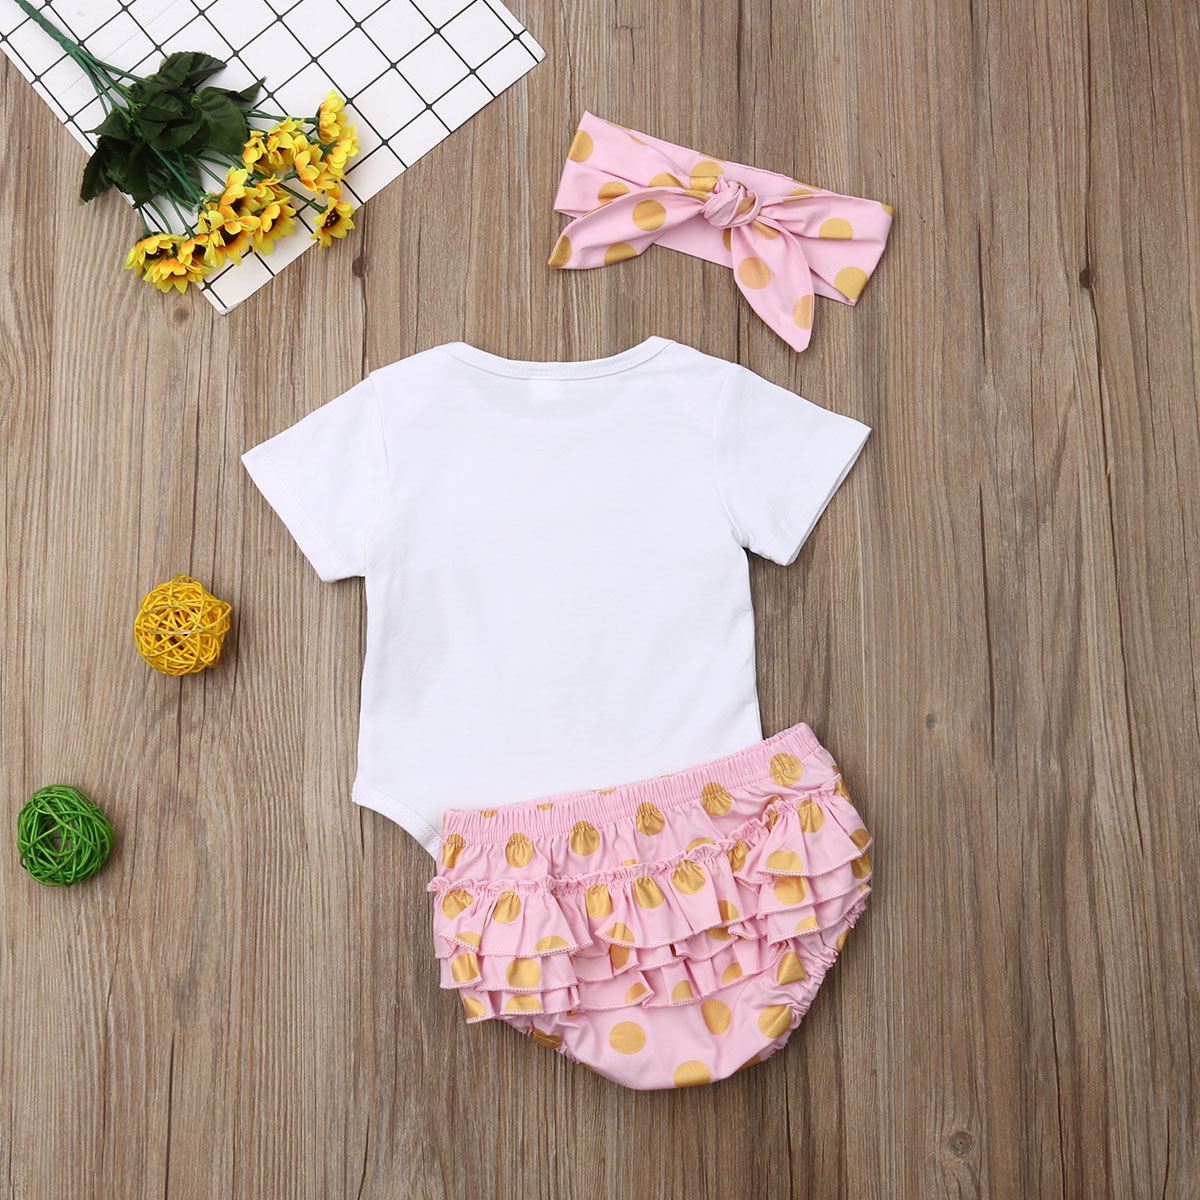 2019 Baby Summer Clothing Infant Baby Girl White Pineapple Romper Ruffle Briefs Dots Shorts+Headband 3Pcs Outfit Set 0-24M